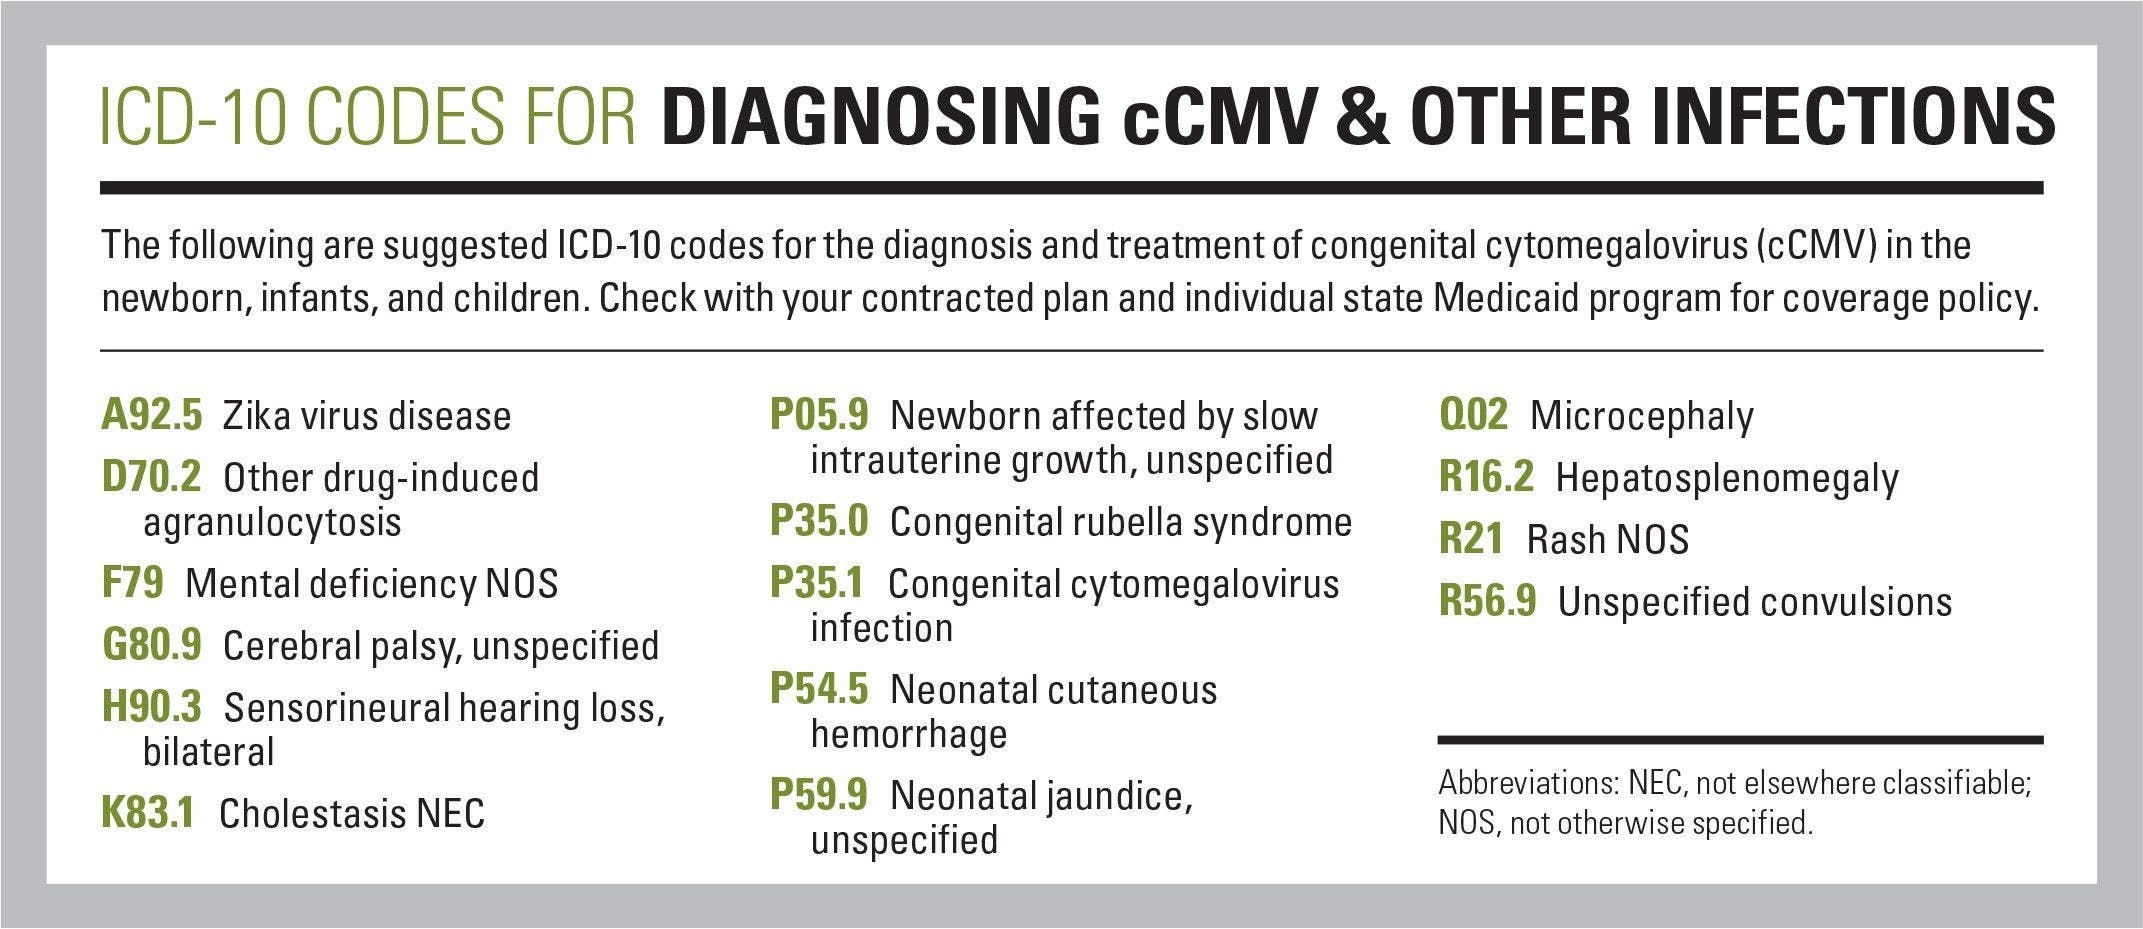 ICD-10 codes for diagnosing cCMV and other infections